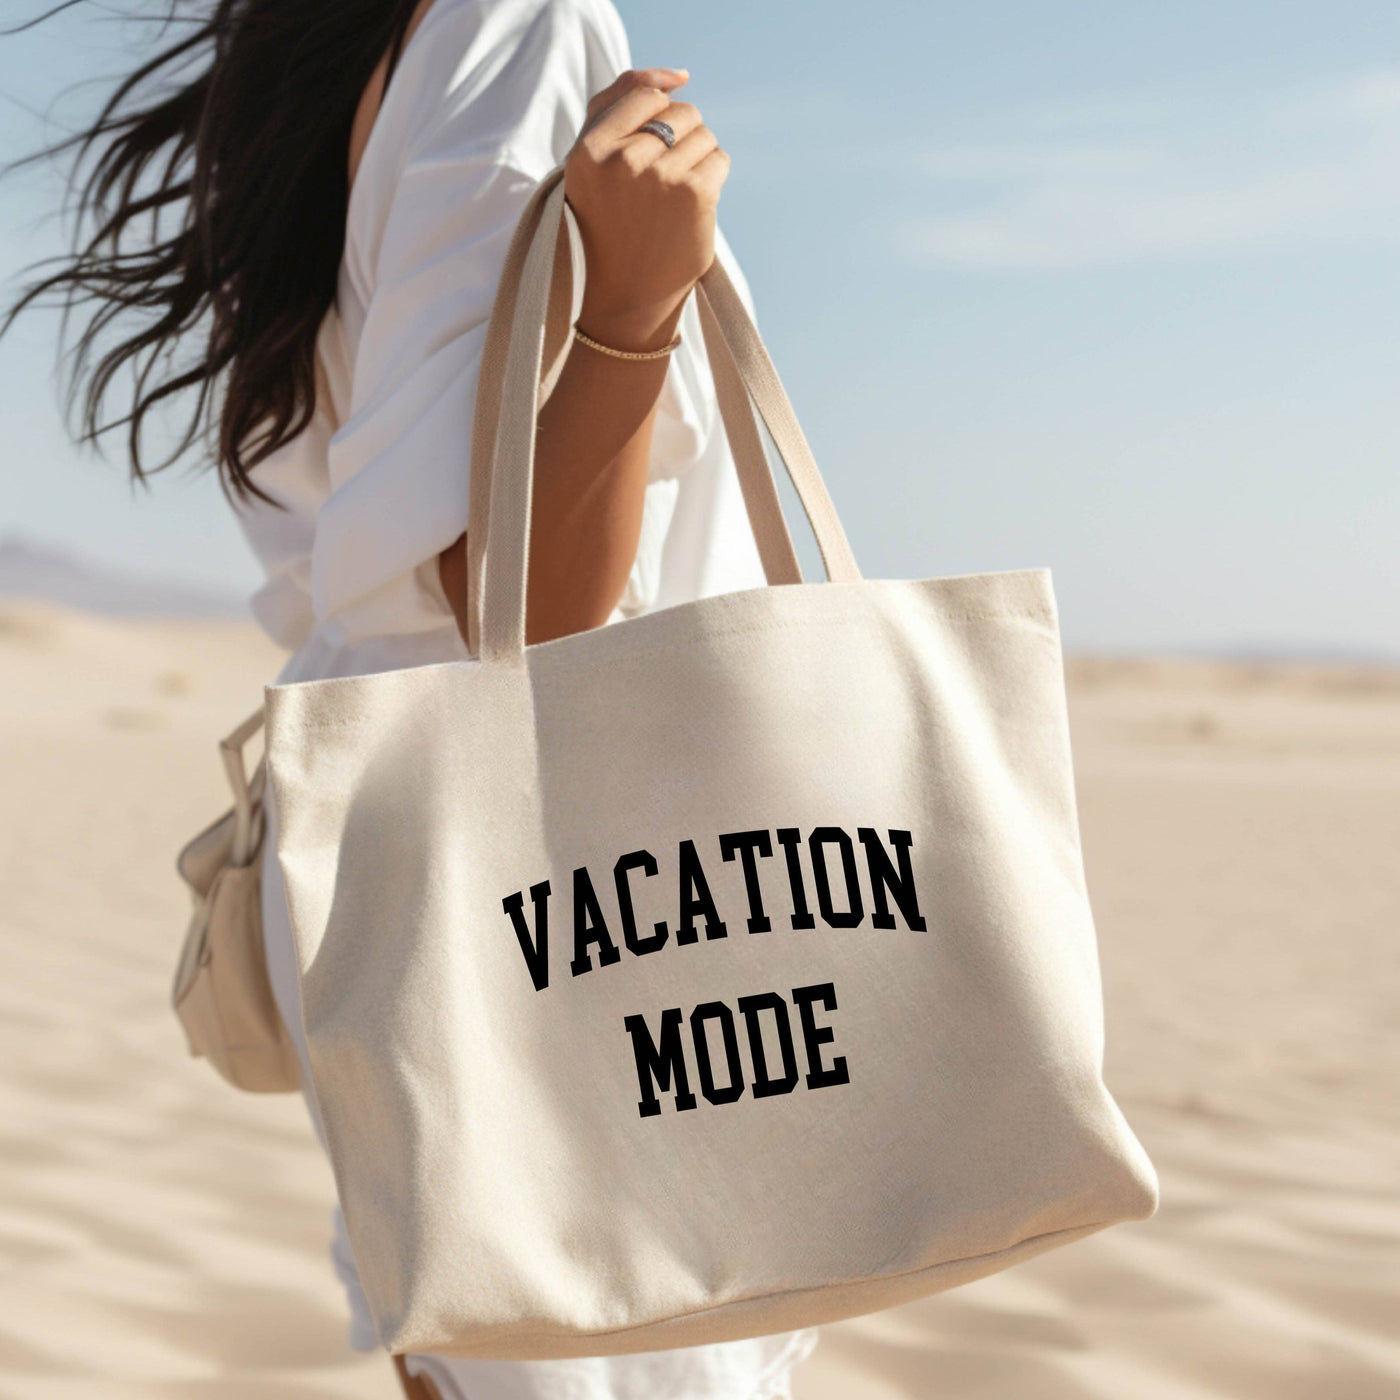 P E T I T R U E | Vacation Mode Beach Bag Canvas Tote Bag, The Local Space, Local Canadian Brands